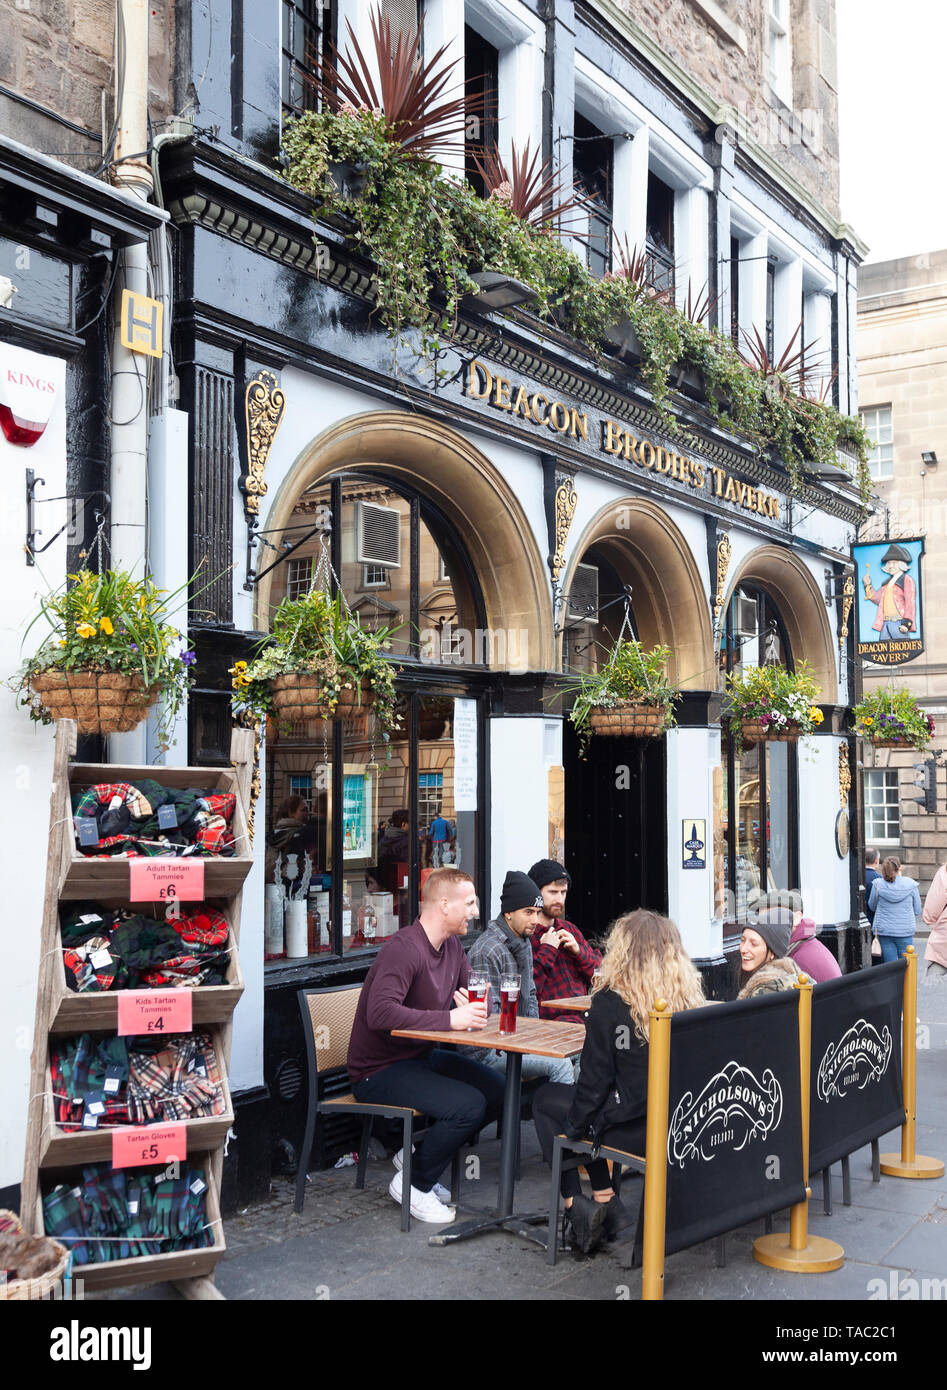 Customers relaxing in the outdoor seating area outside Deacon Brodie's Tavern in Lawnmarket, in the Old Town area of Edinburgh, Scotland, UK. Display  Stock Photo